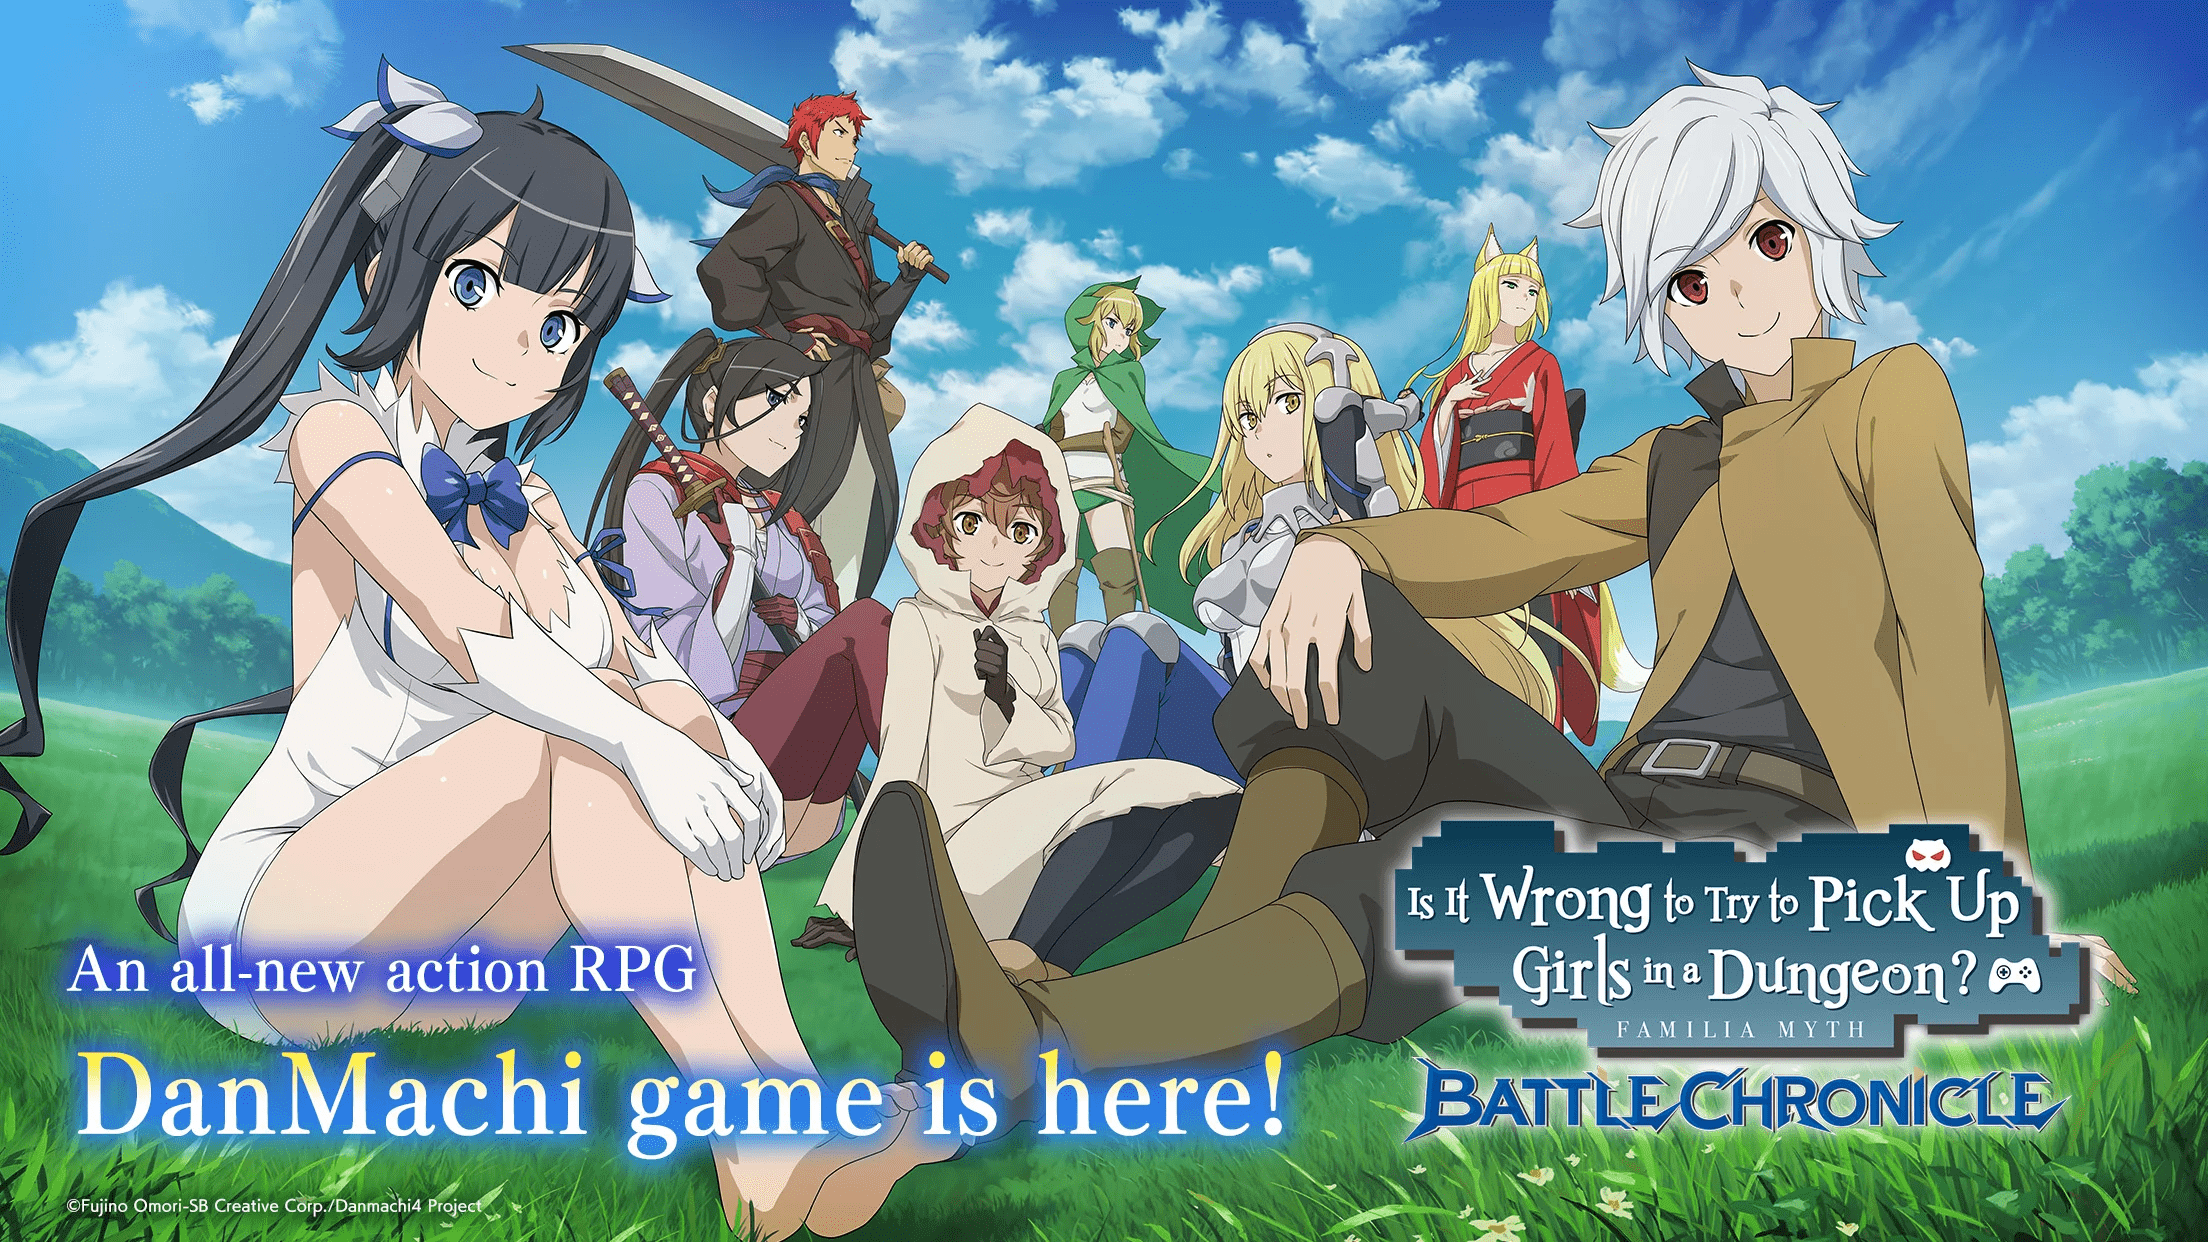 Is It Wrong to Try to Pick Up Girls in a Dungeon? Battle Chronicle